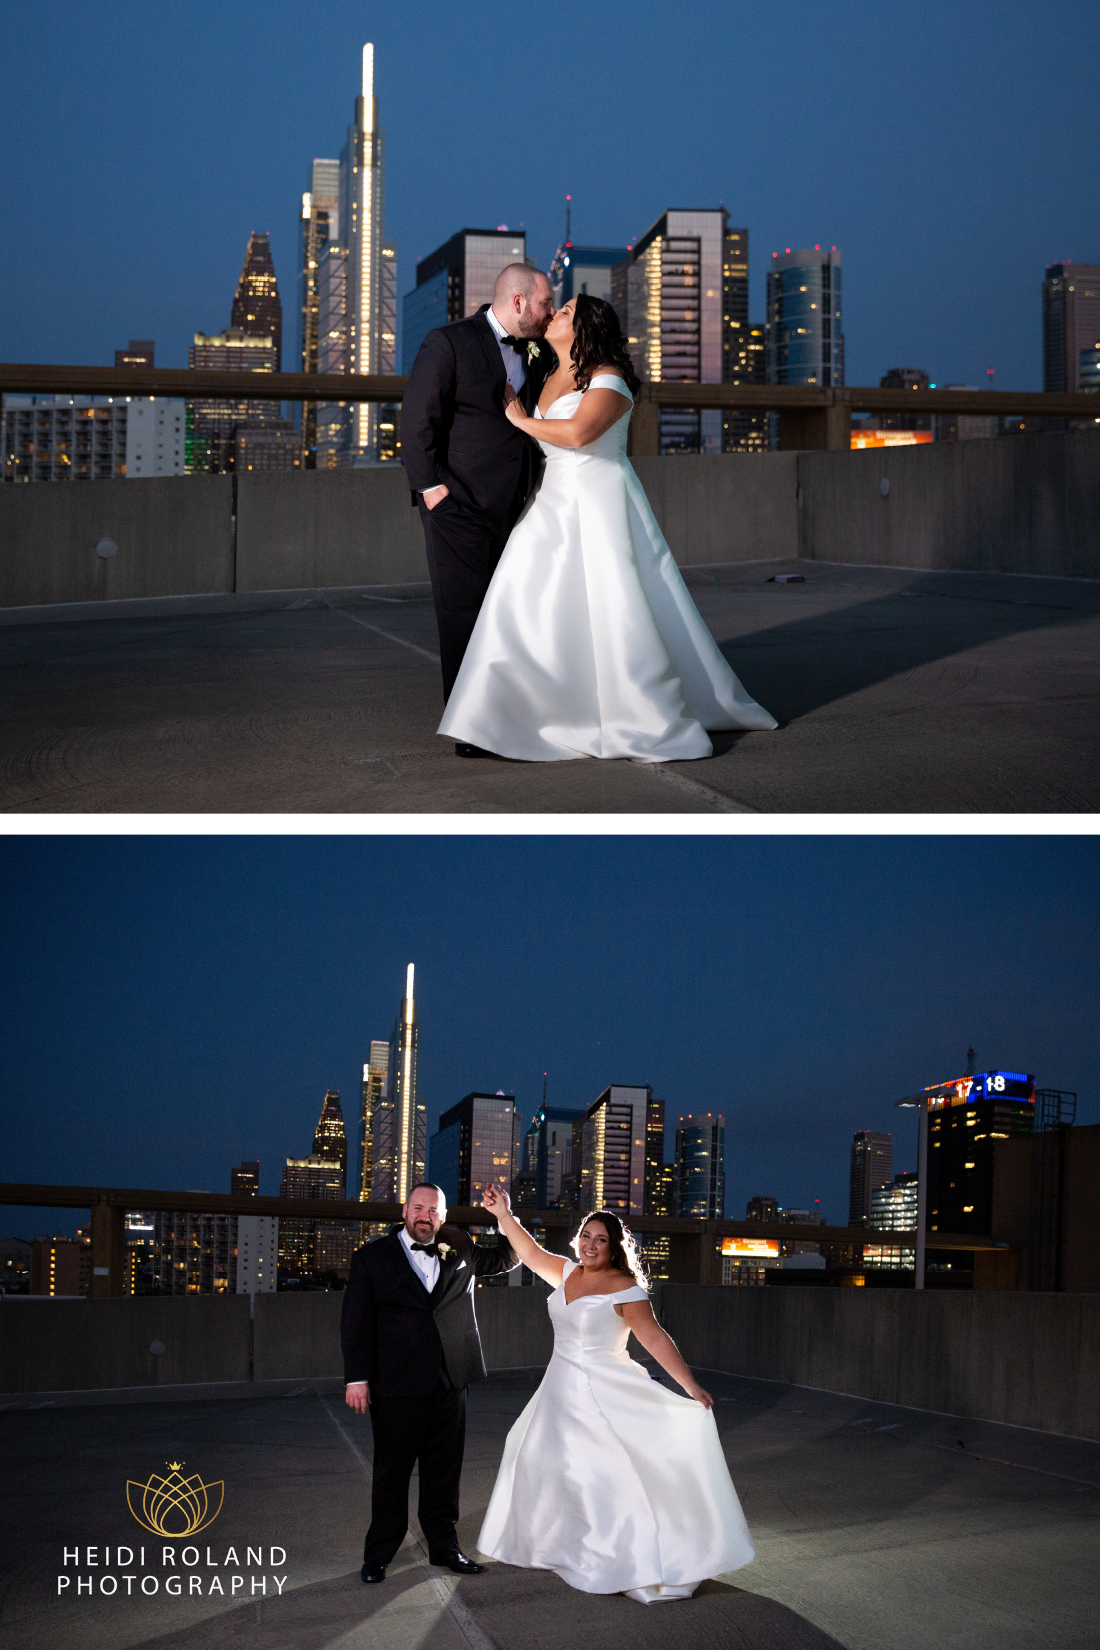 Bride and groom on the rooftop of the Cira Centre at night with philadelphia skyline